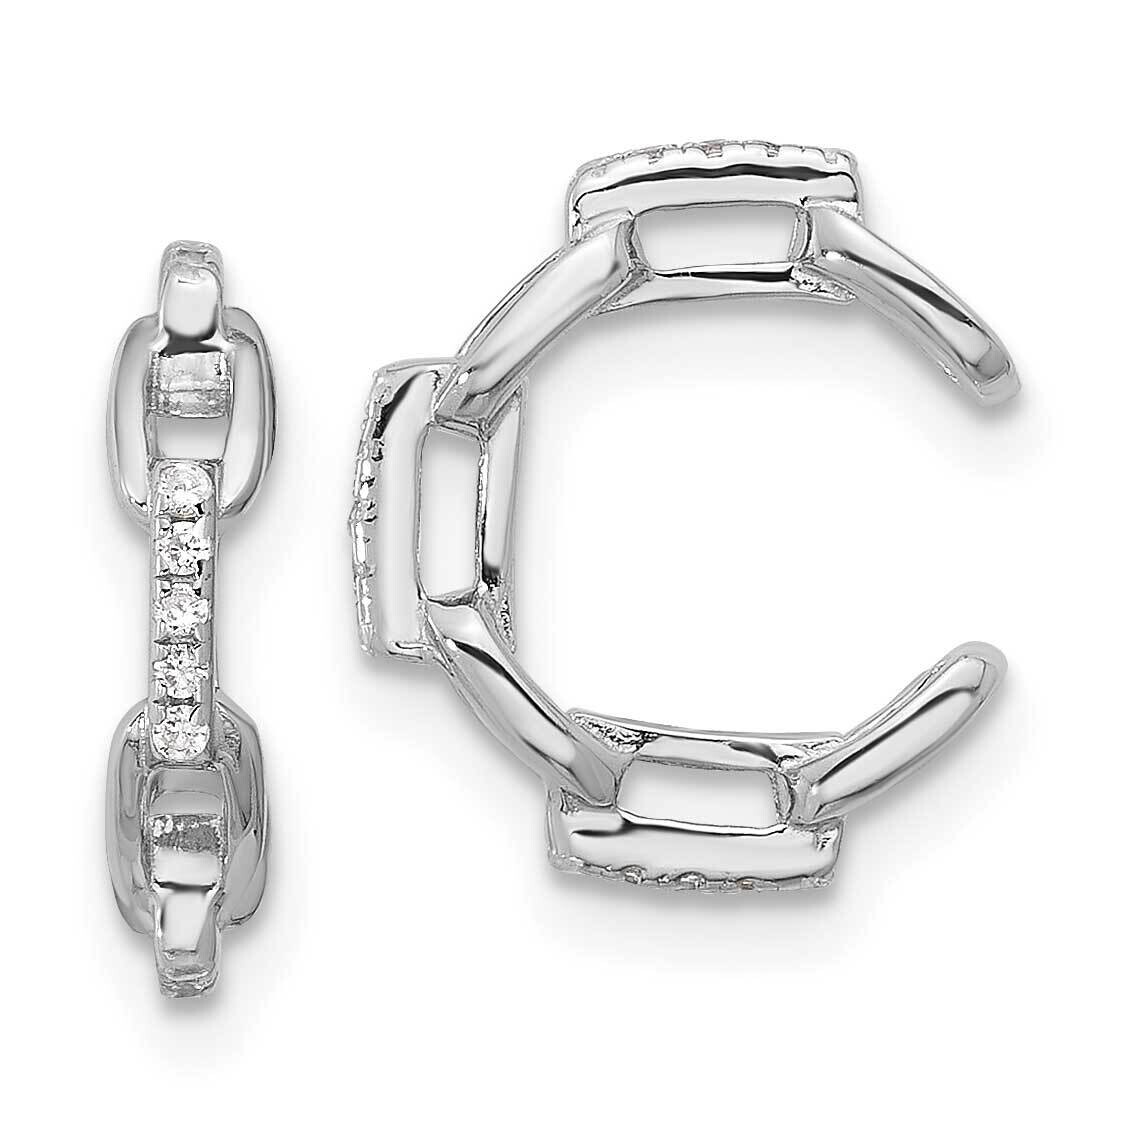 Rhod-Plated CZ Chain Link Design Pair Of 2 Cuff Earrings Sterling Silver QE17092